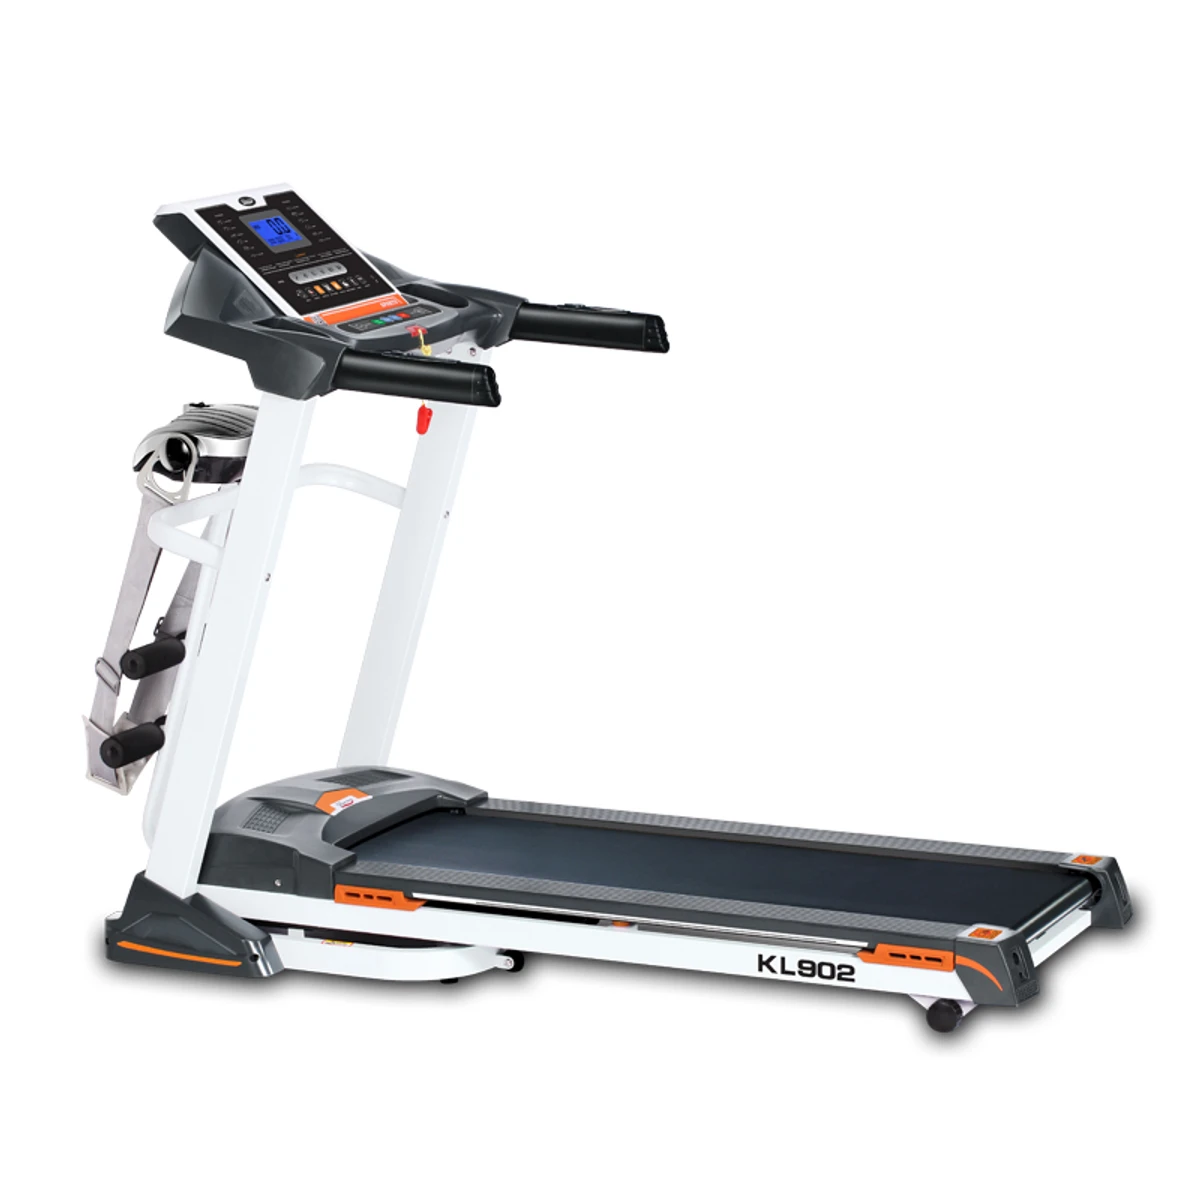 Daily youth KL-902 Multi-function Foldable Motorized Treadmill